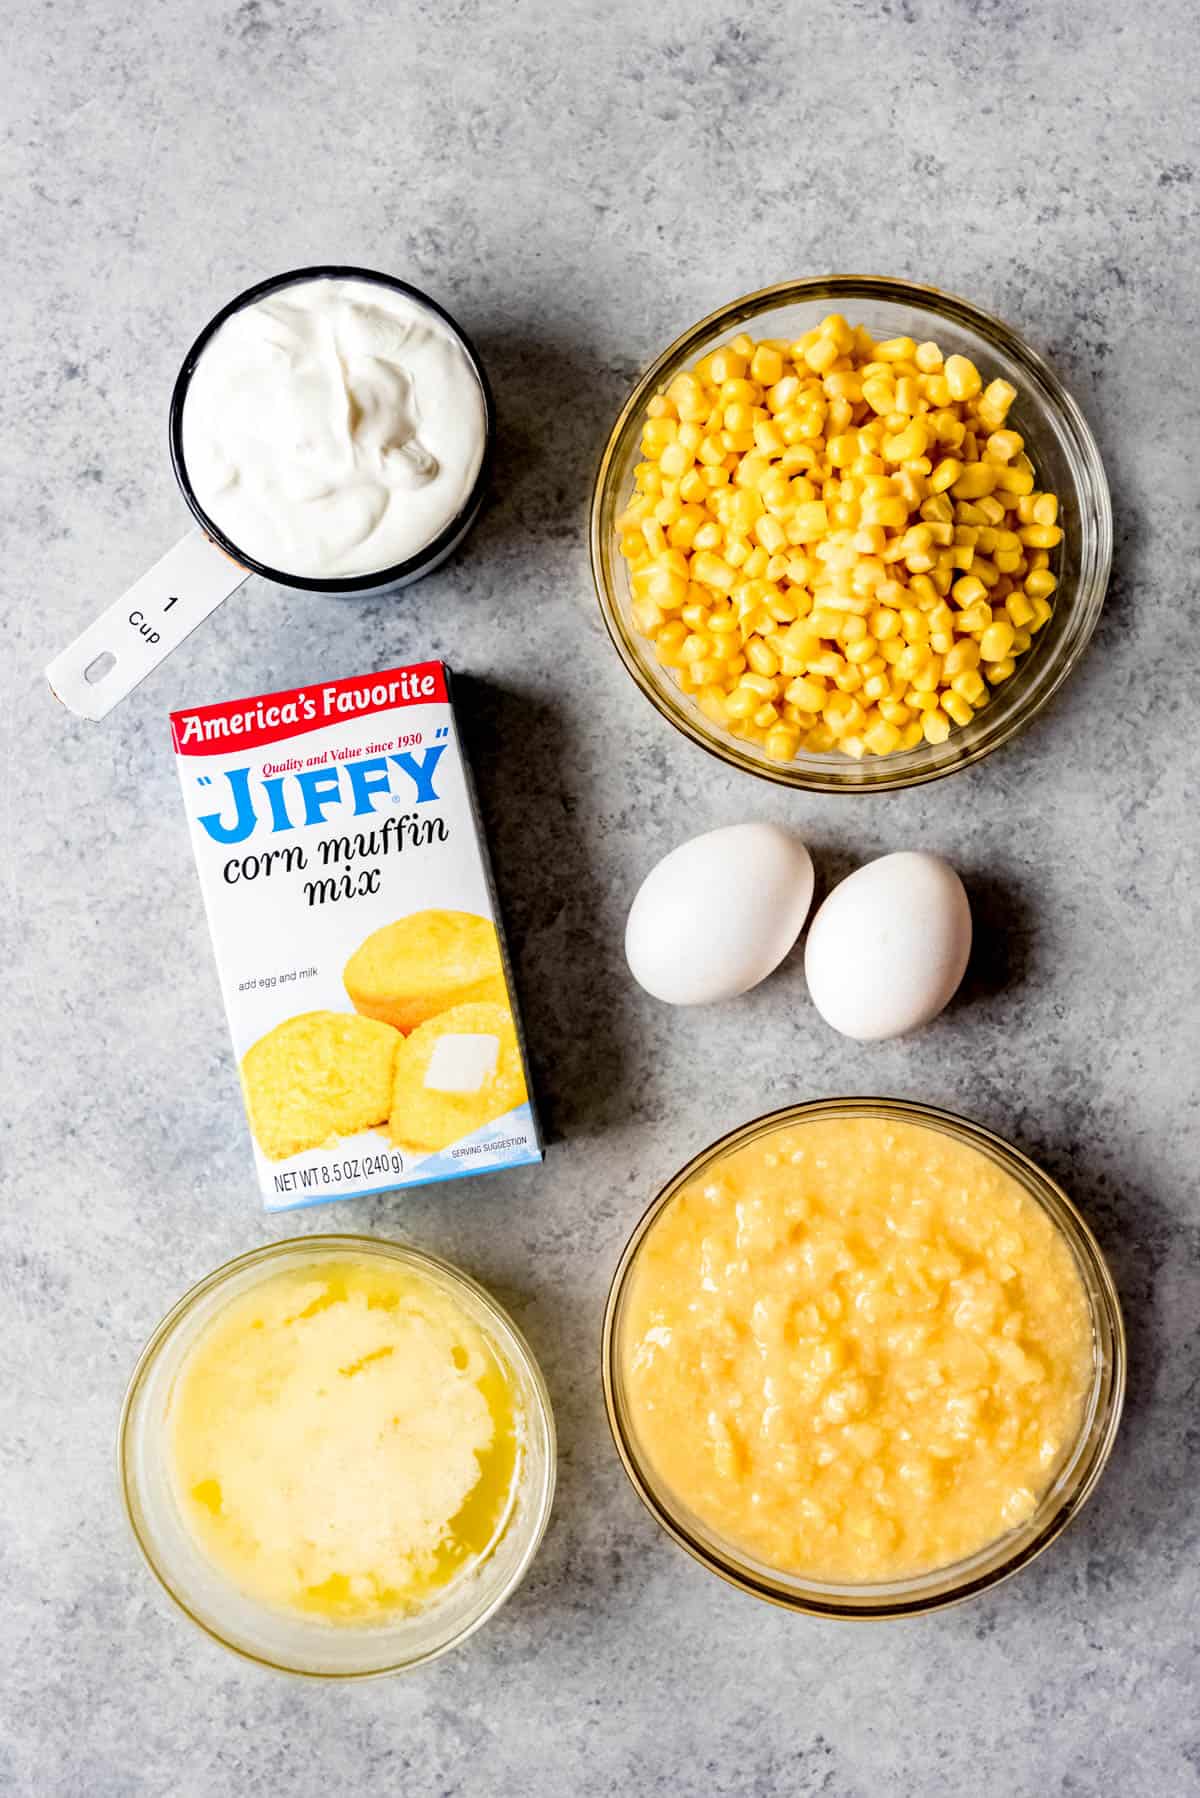 An image of the ingredients for making Jiffy corn casserole.